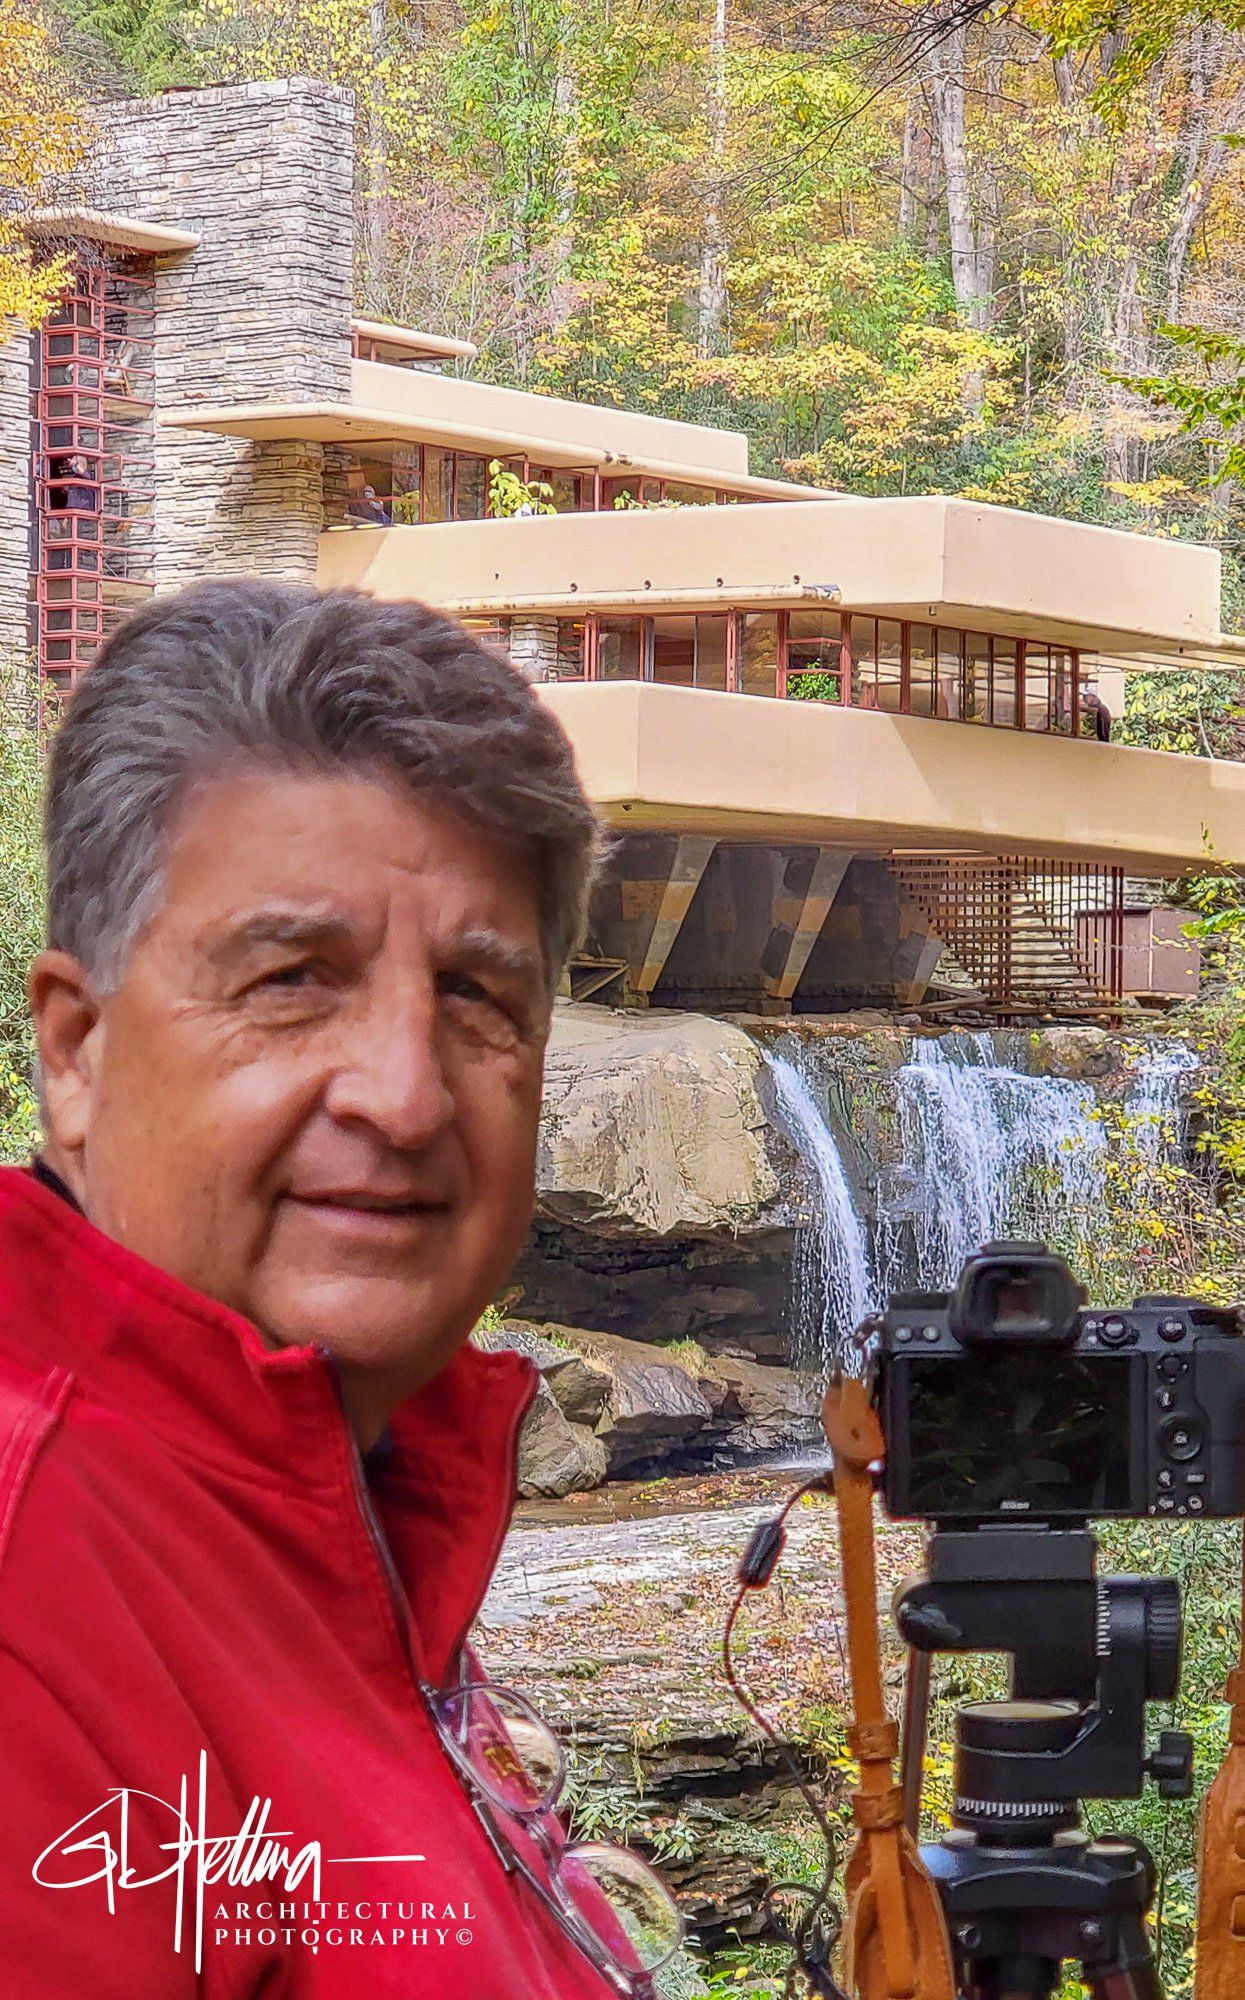 Glenn Hettinger Photographing a distinctive home for one of the best coffee table books